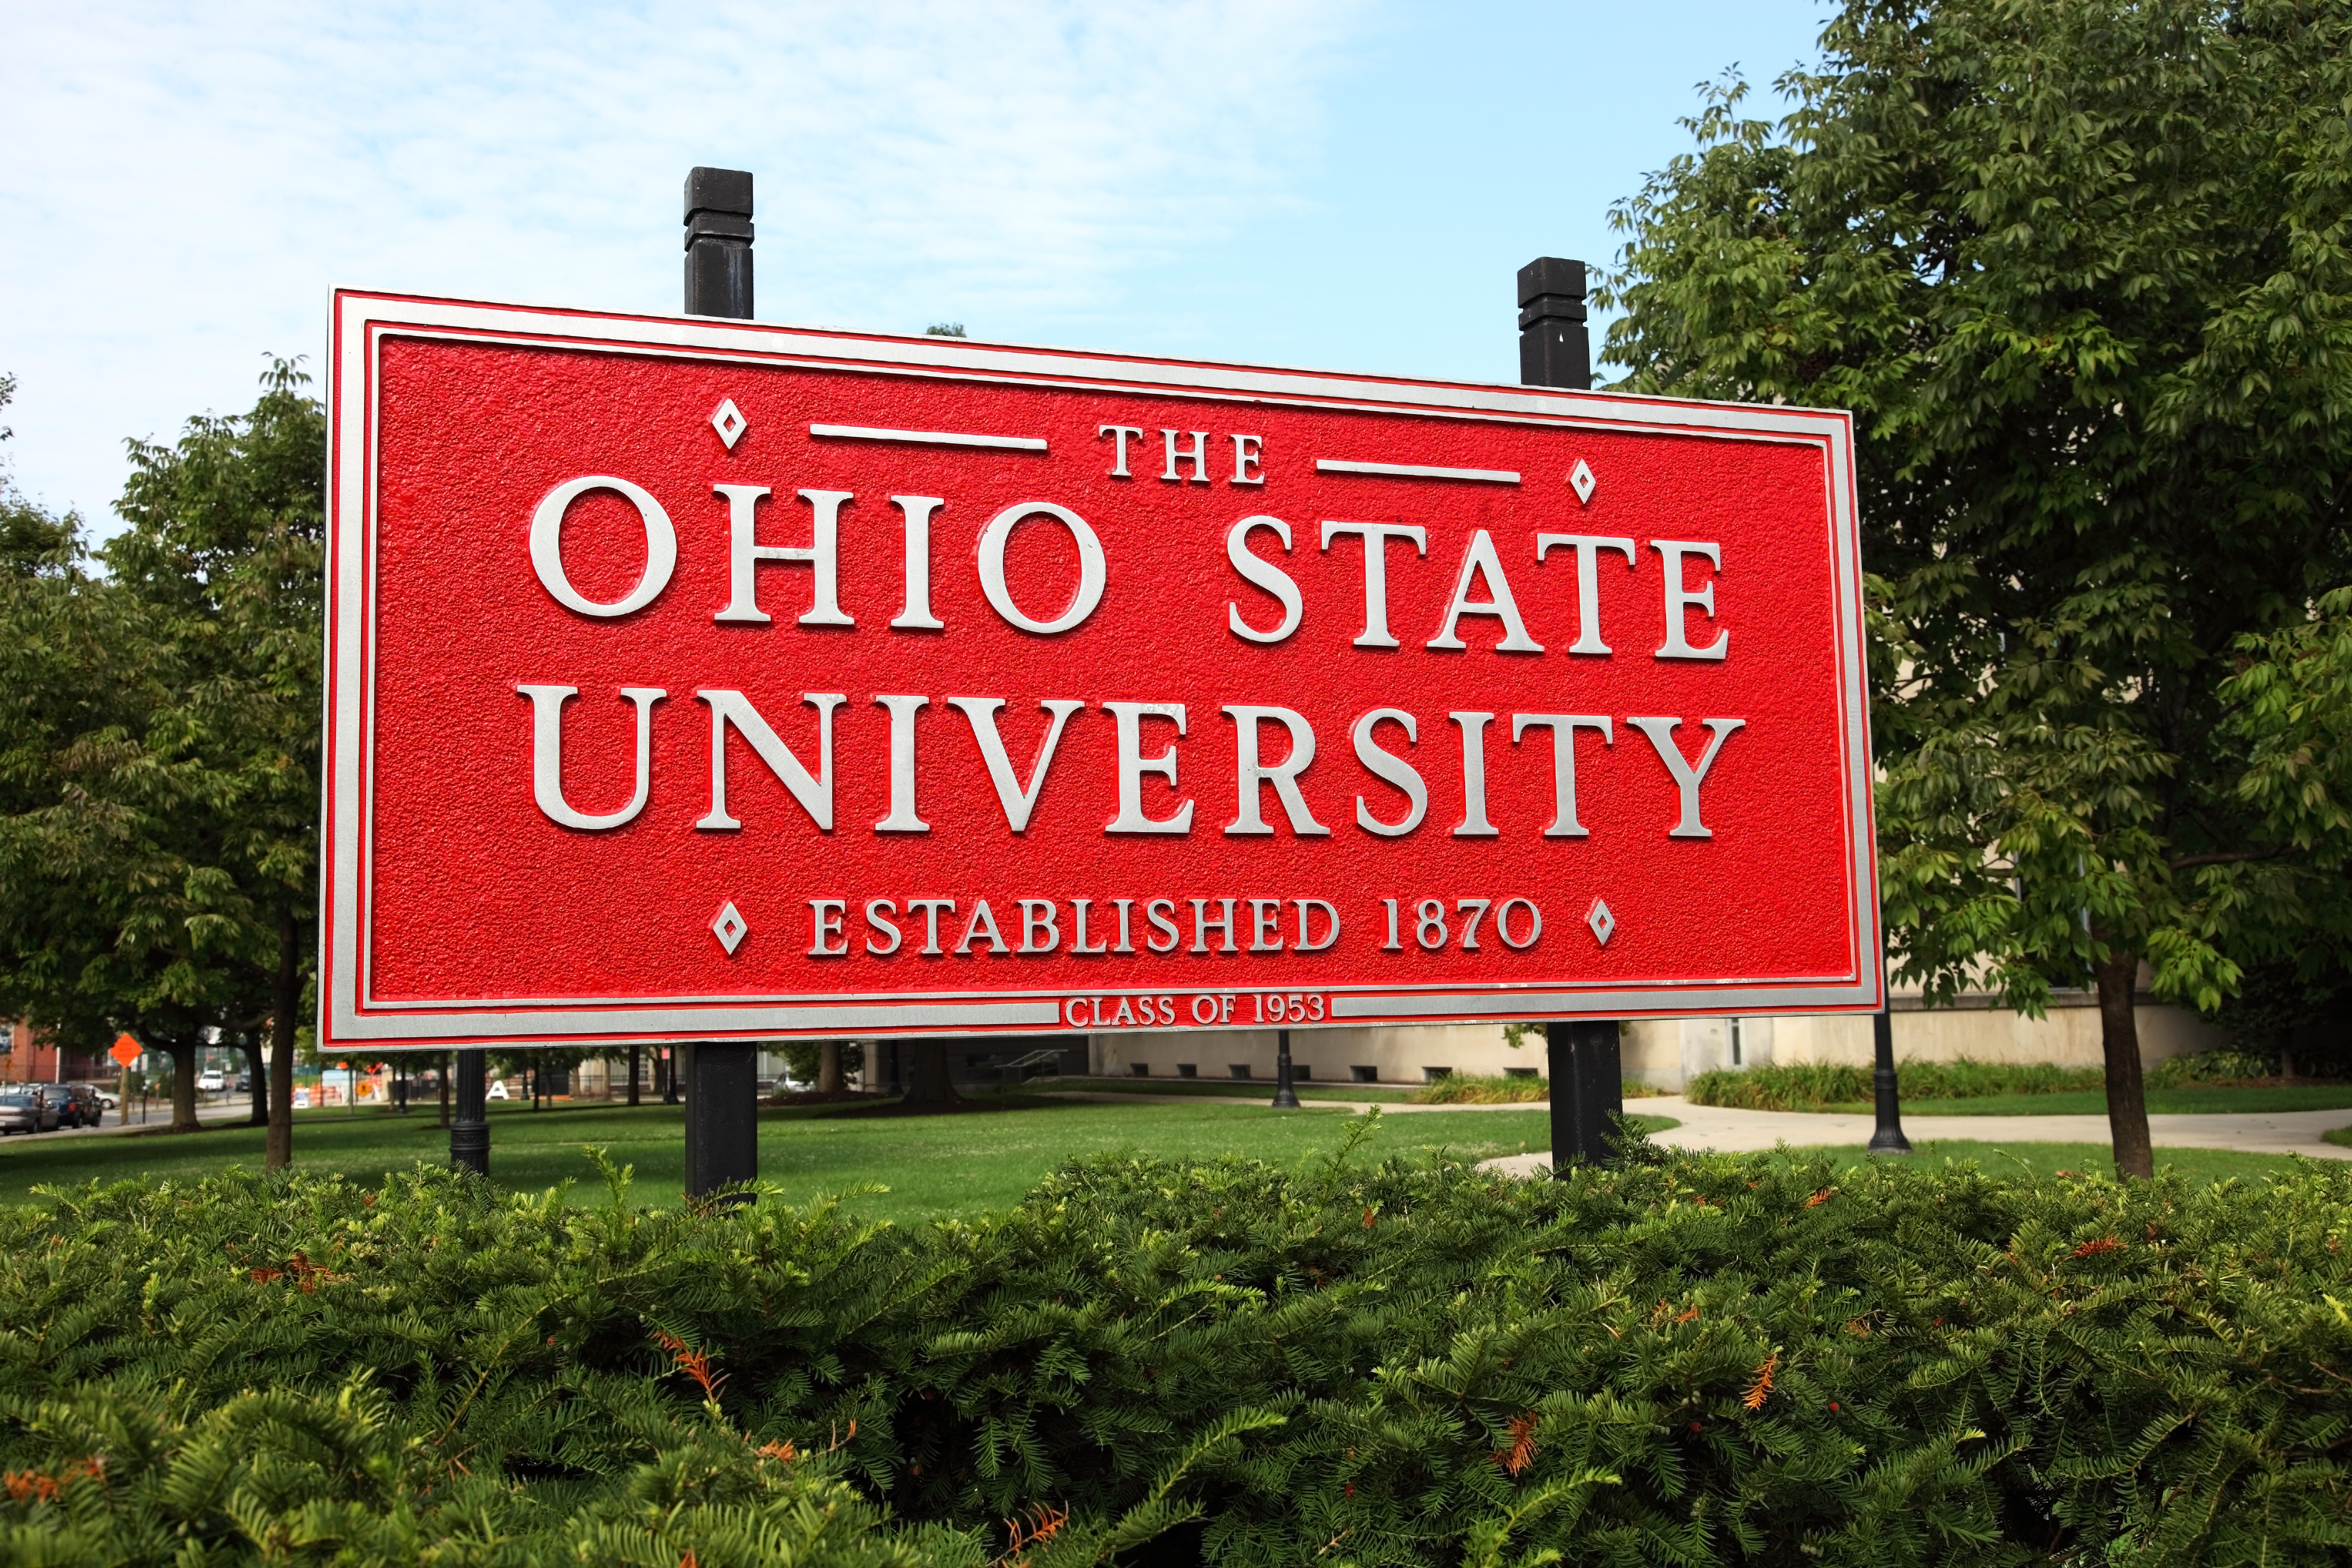 Large red sign set behind bushes that reads "The Ohio State University, Established 1870"